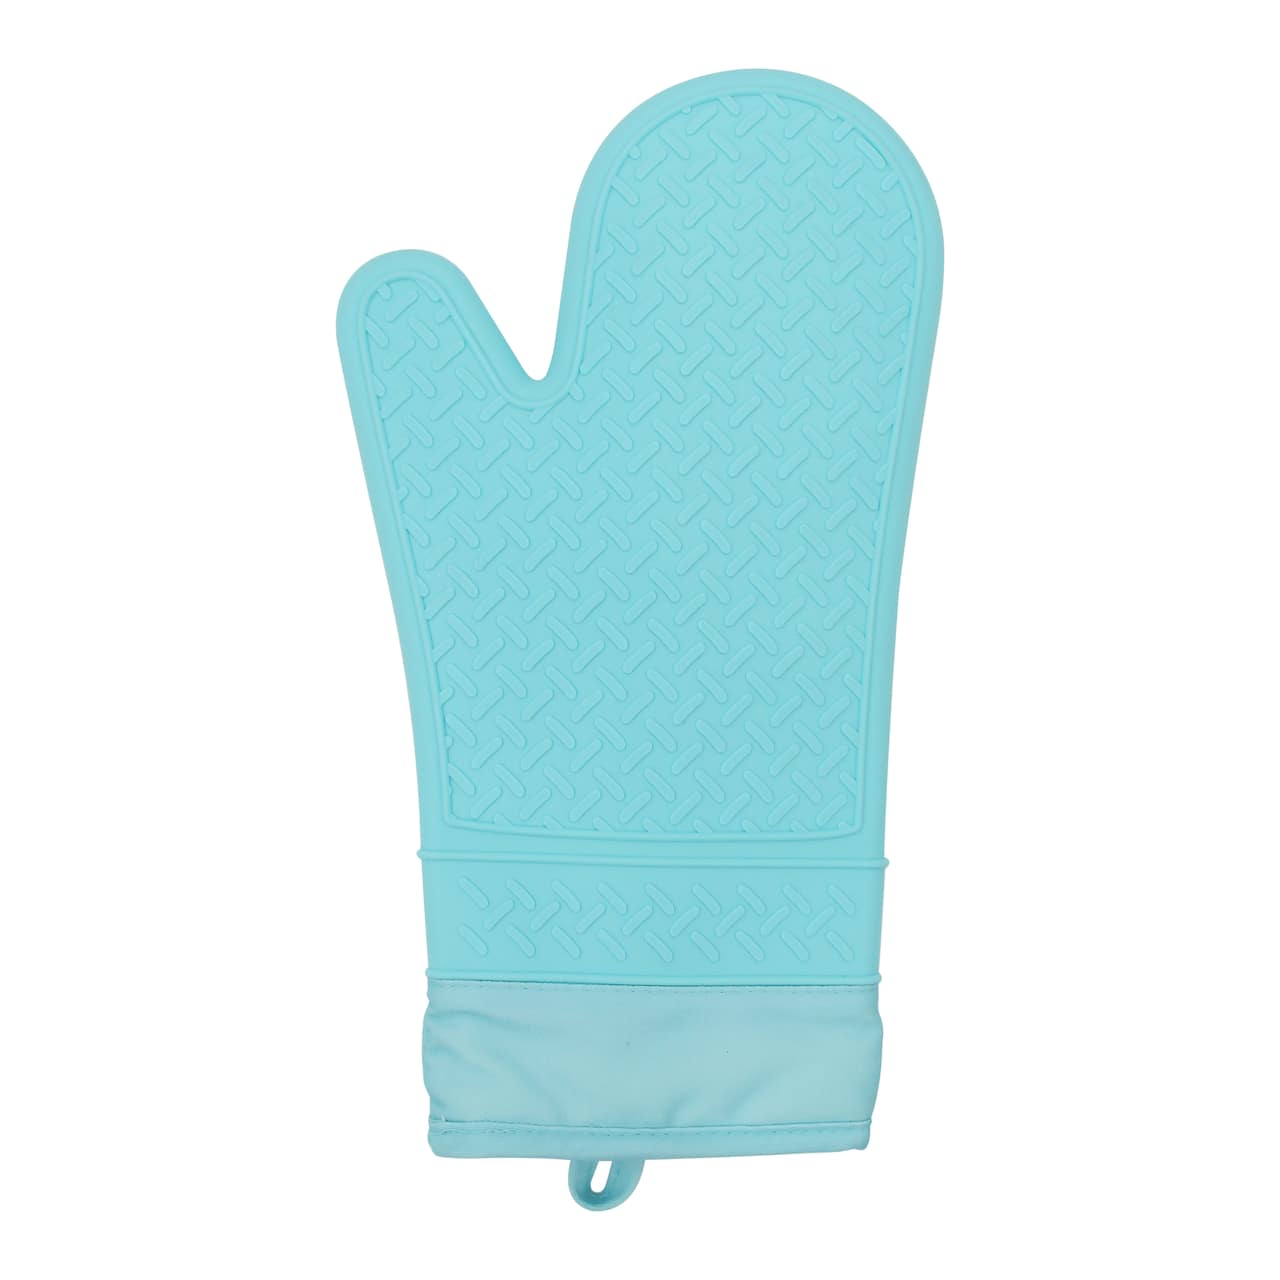 Celebrate It Silicone Oven Mitt - Turquoise - 13 x 7.2 x 1 in